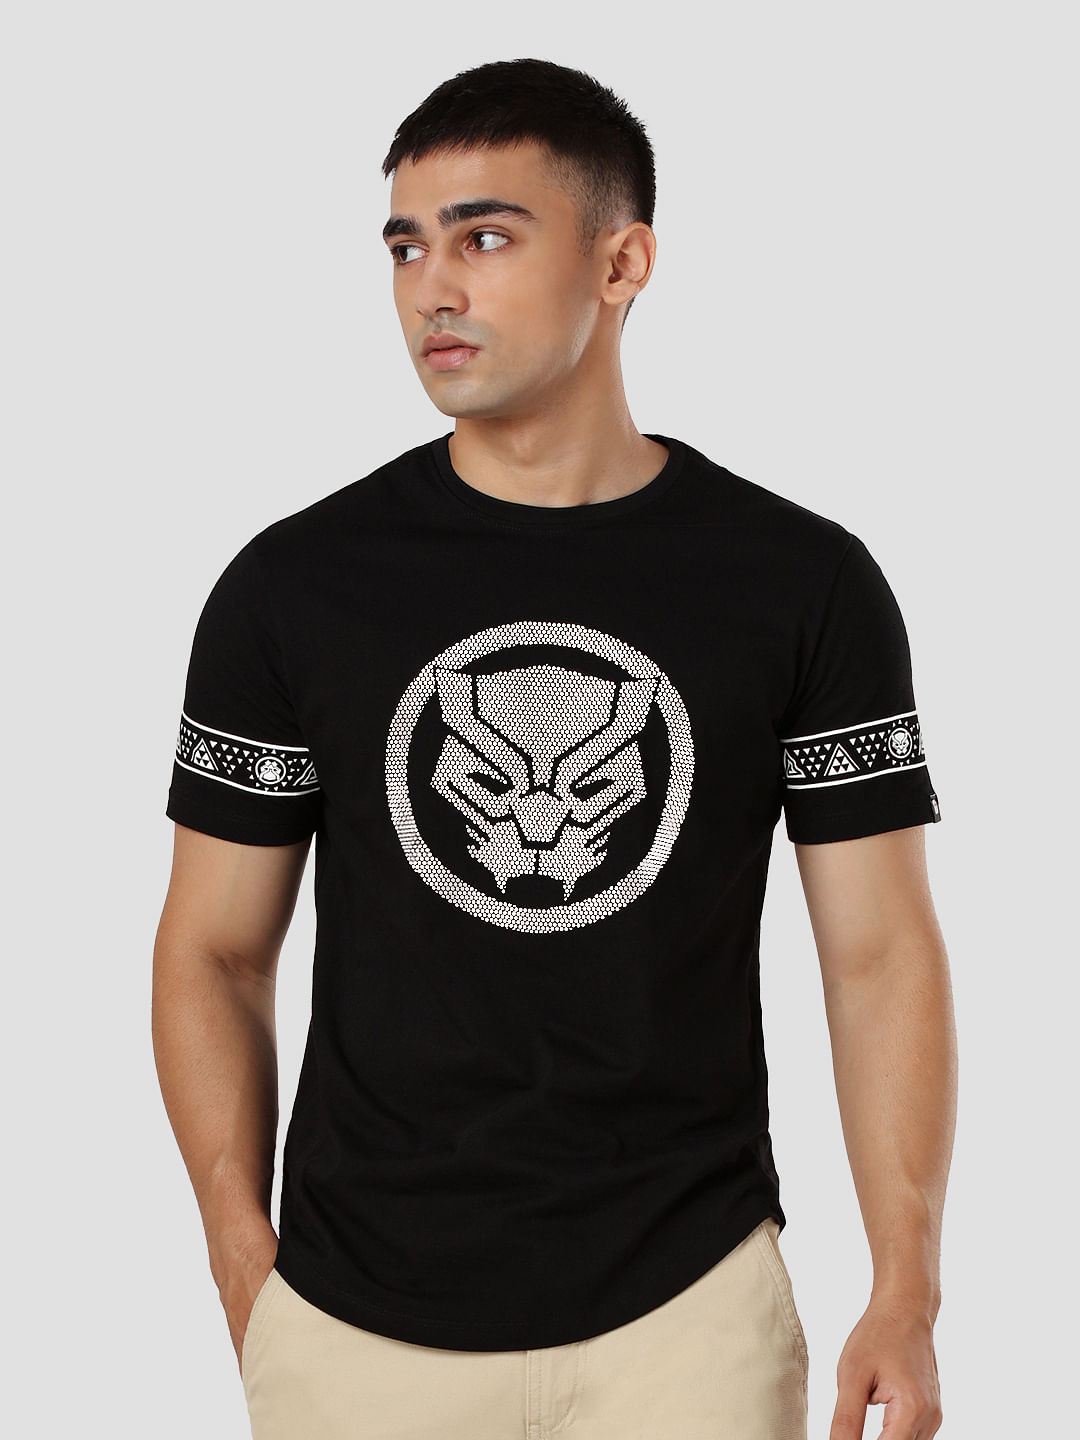 Buy Black Panther: Loyalty Drop Cut T-shirts online at The Souled Store.